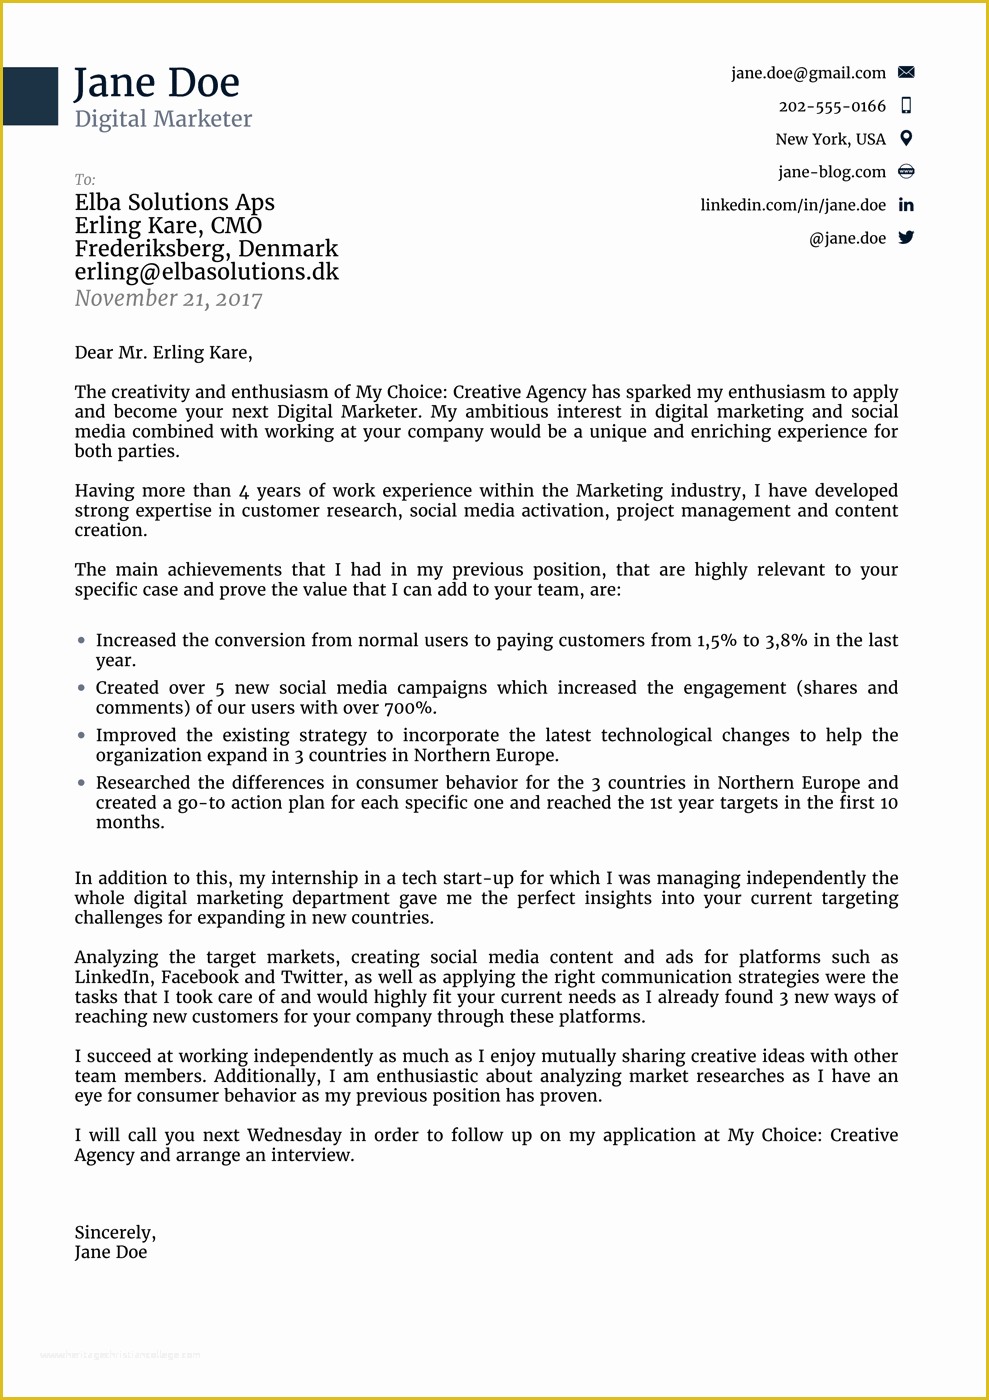 Professional Cover Letter Template Free Of 2018 Professional Cover Letter Templates Download now